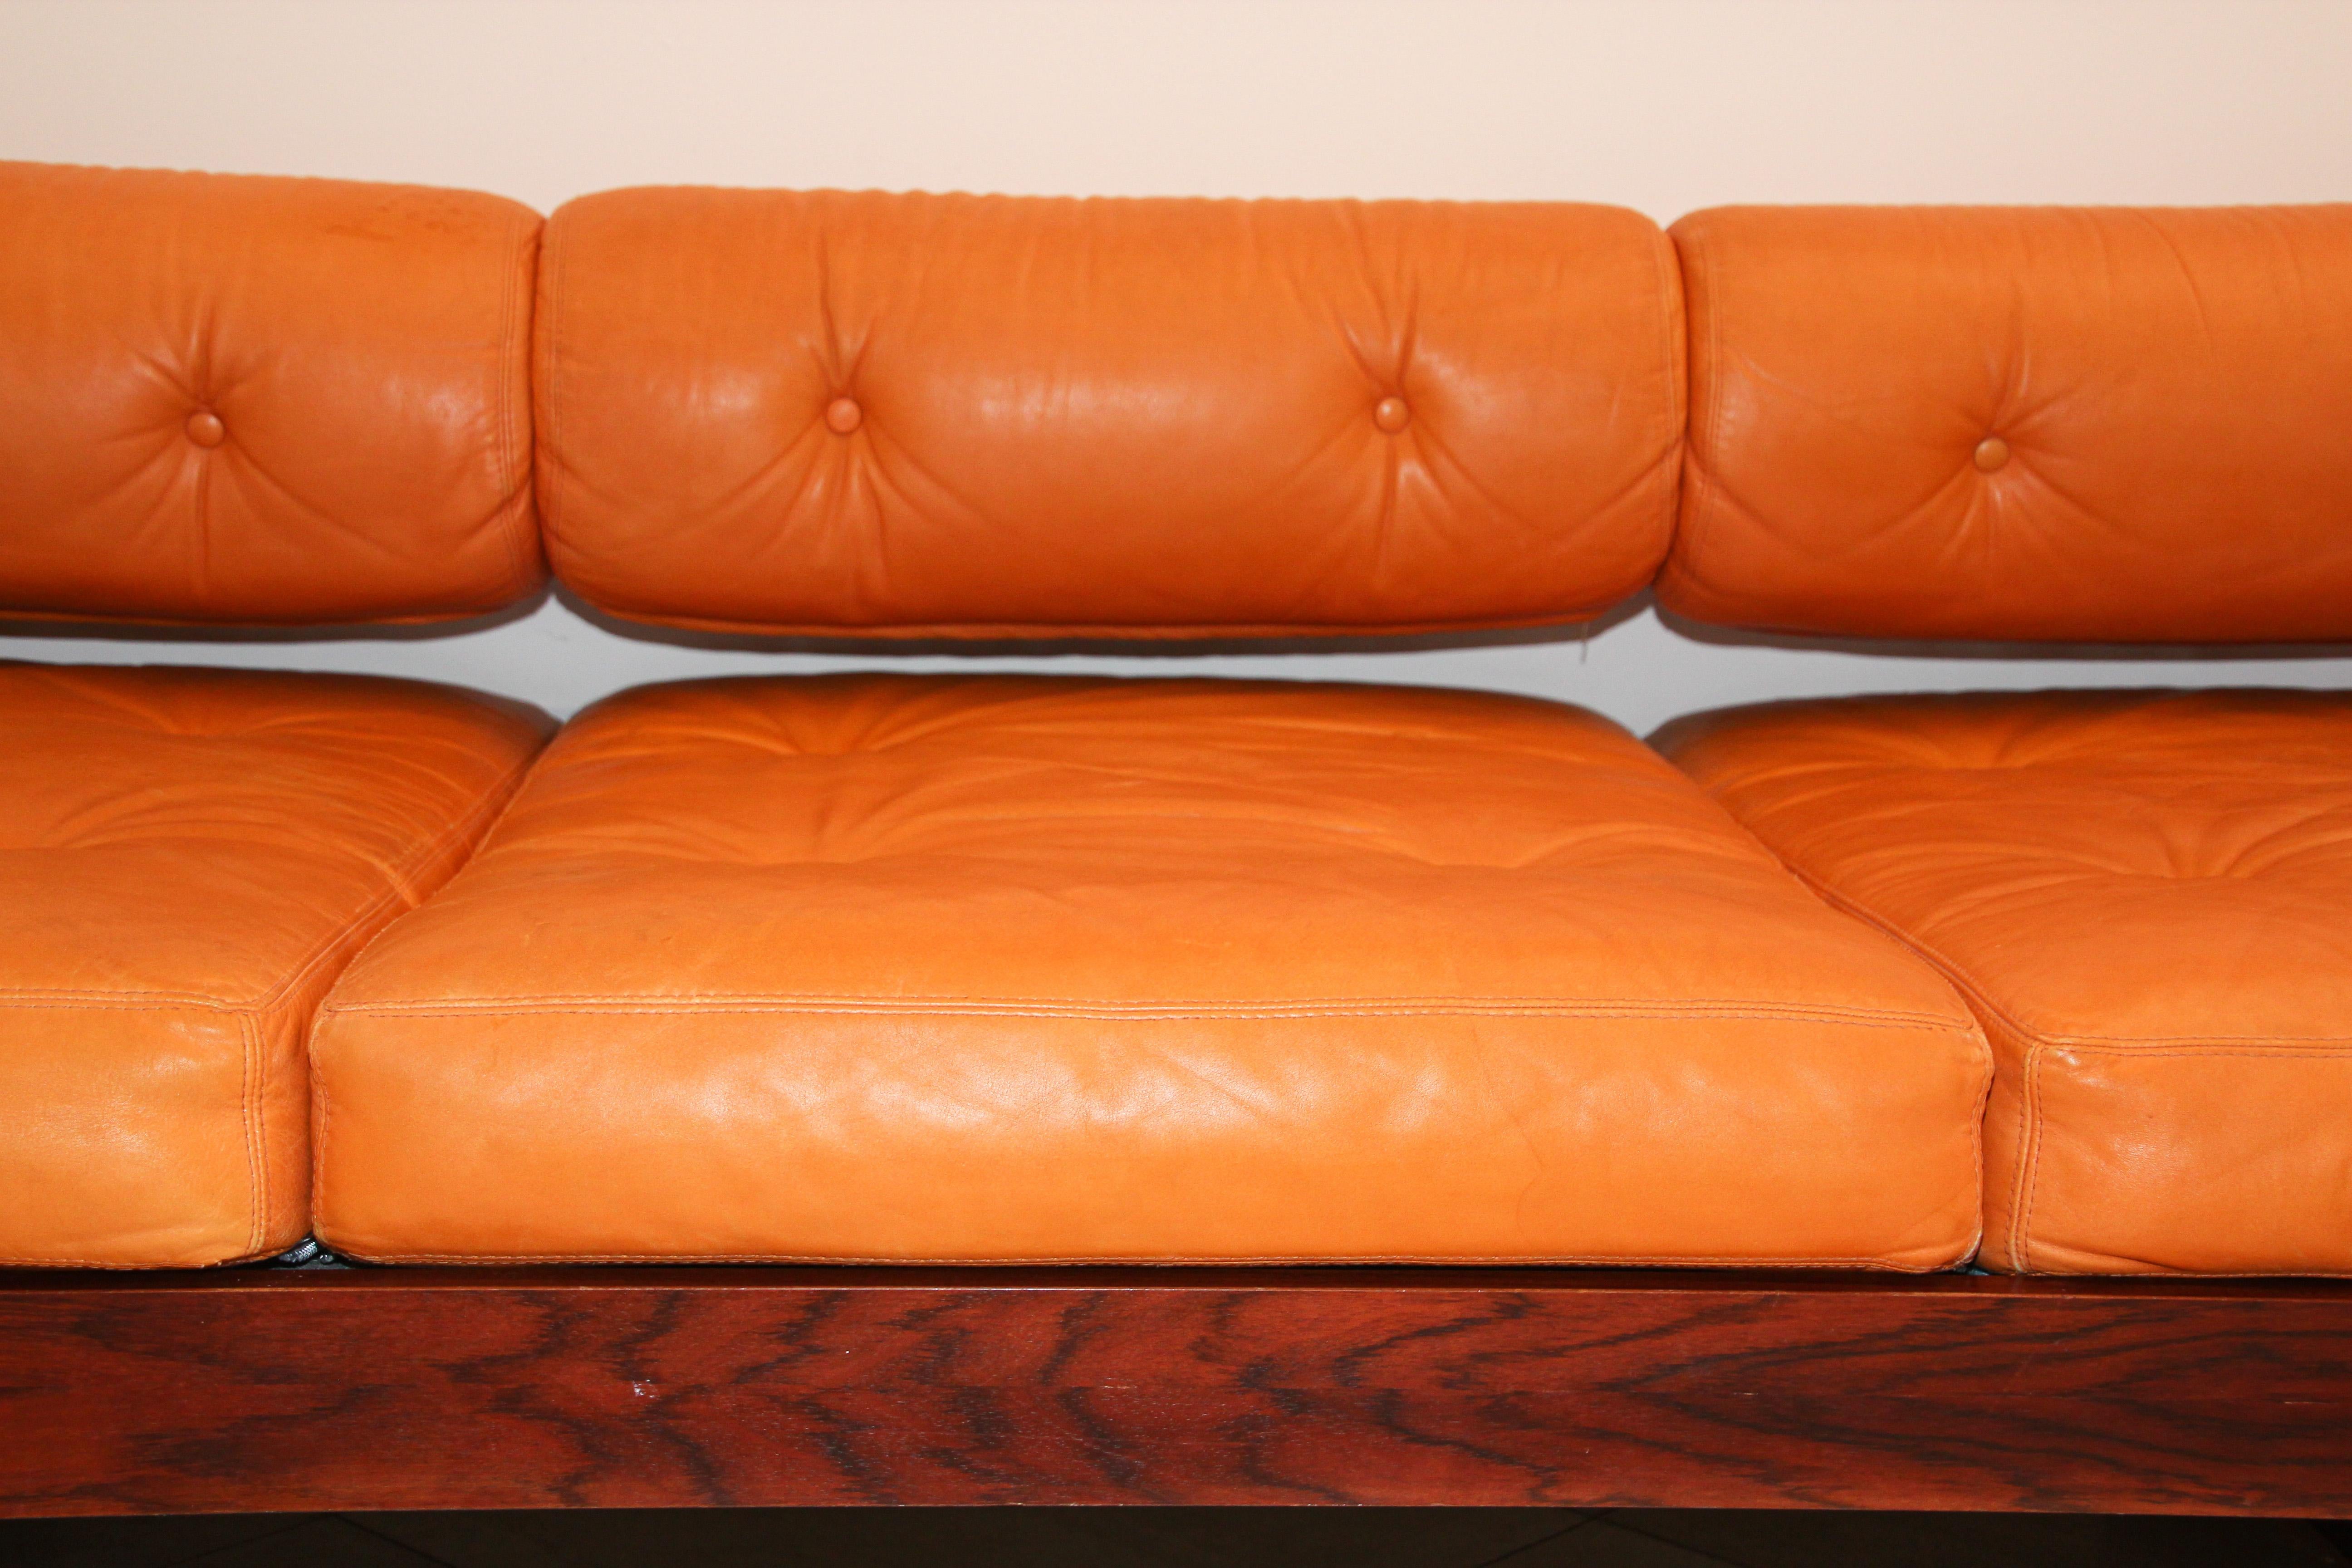 20th Century Gianni Songia Leather Daybed and Sofa for Sormani, Italy, 1963 For Sale